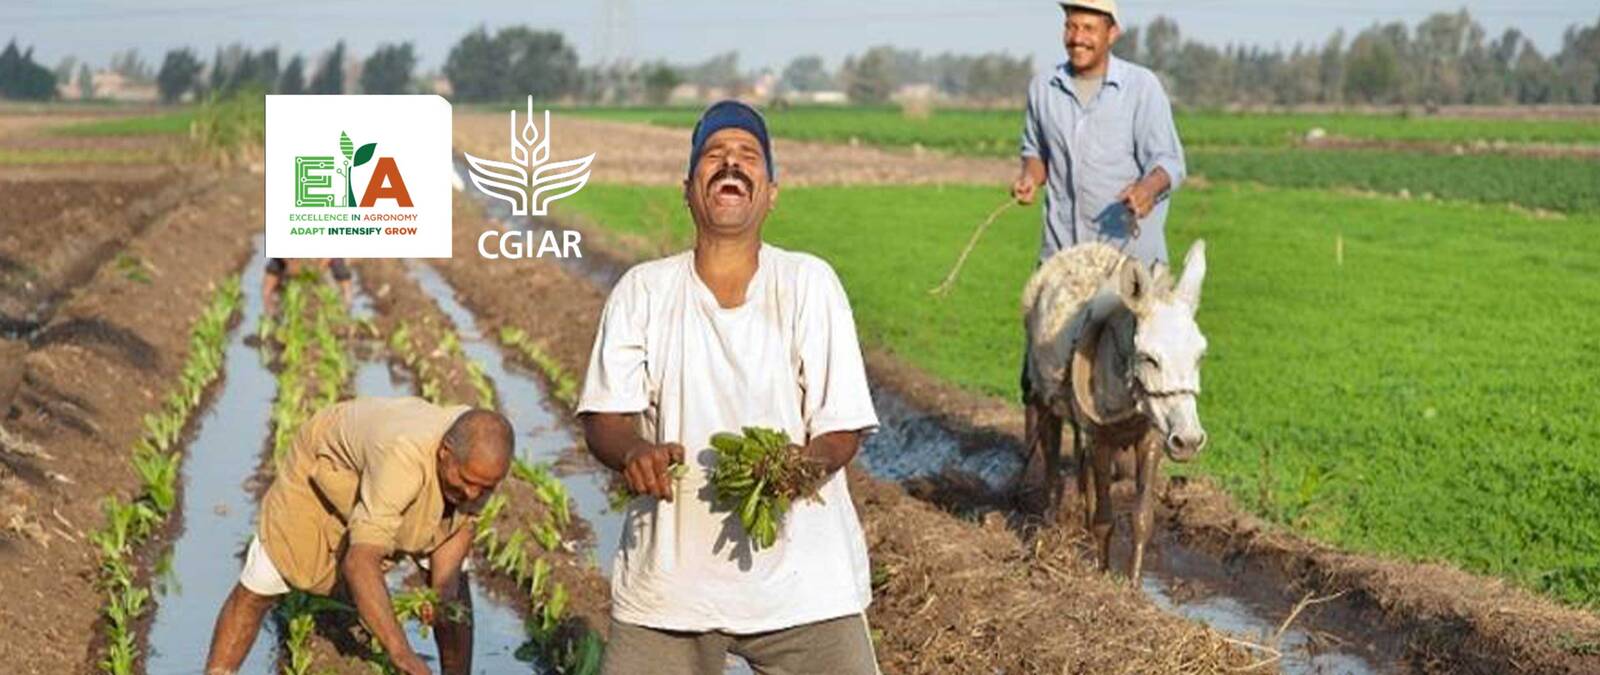 June 27th sees the launch of the CGIAR Excellence in Agronomy 2030 Initiative in CWANA 